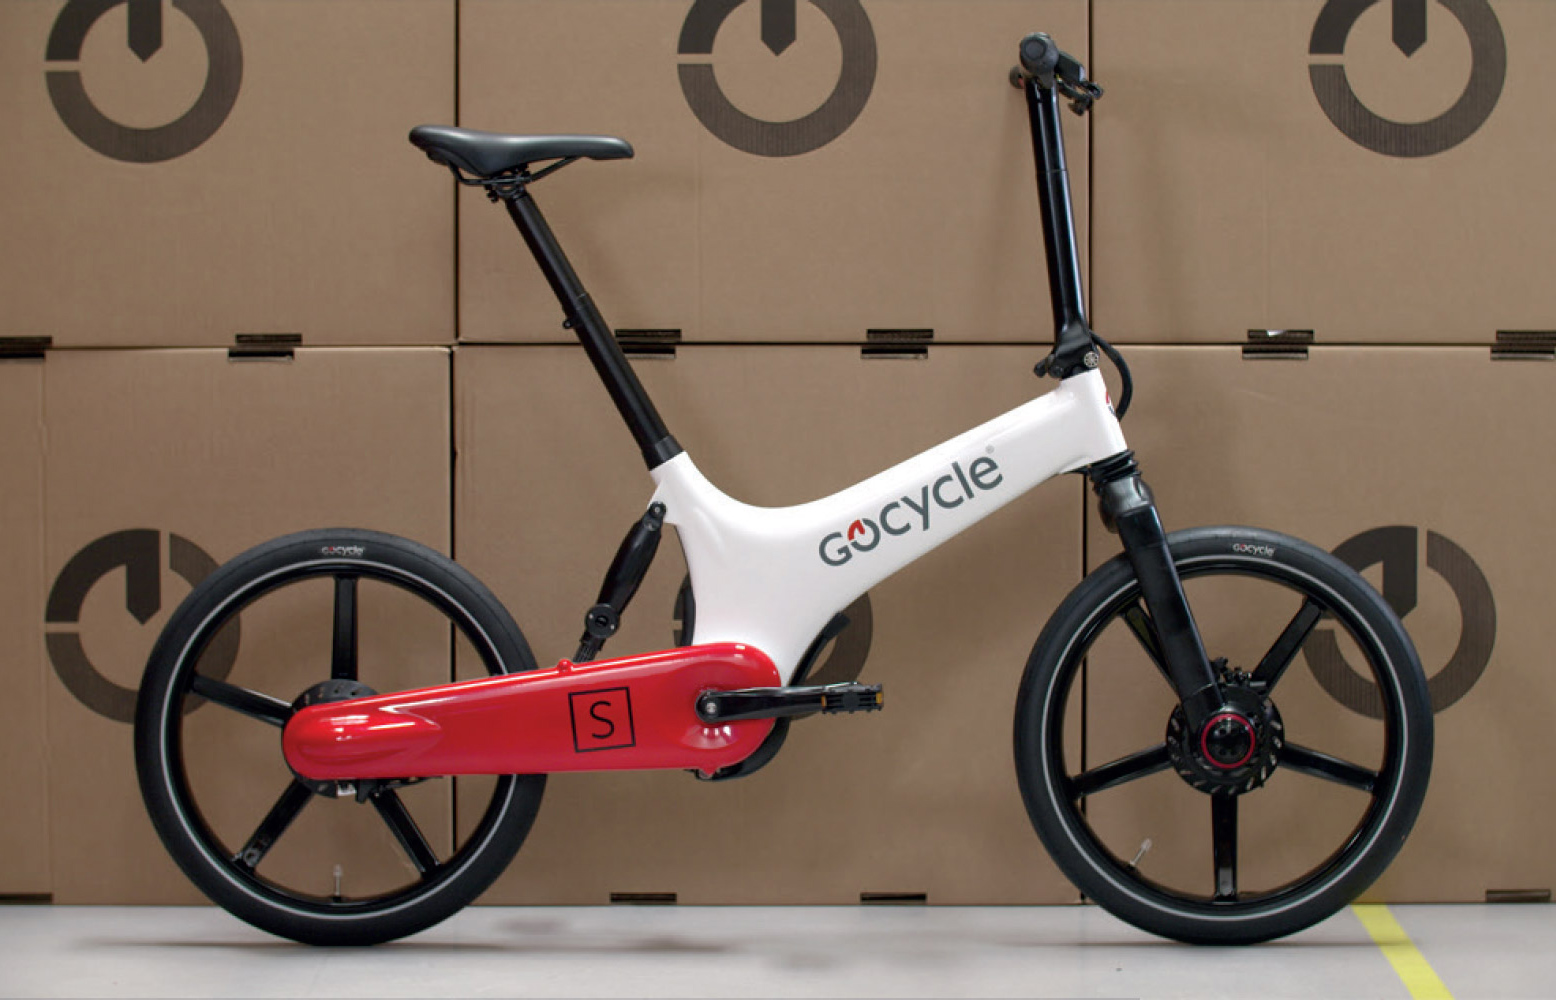 Gocycle ready for delivering